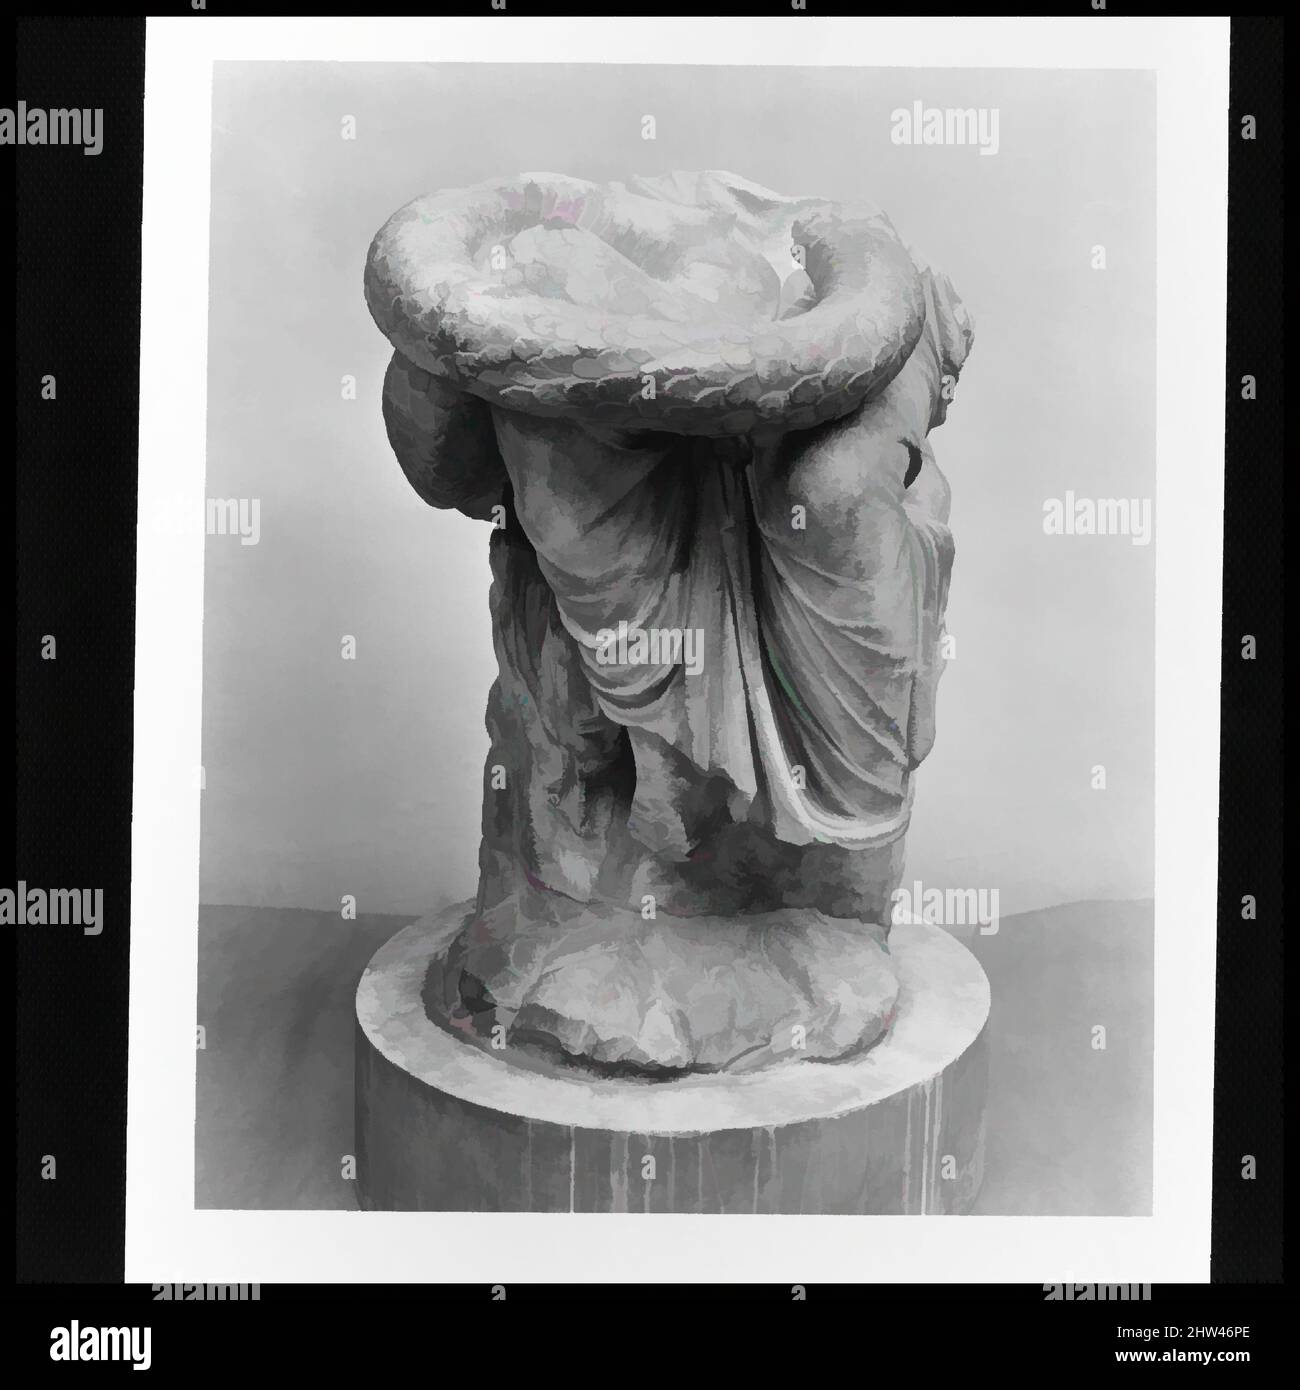 Art inspired by Lower part of a marble seated statue of Hygieia, Imperial, 1st or 2nd century A.D., Roman, Marble, H. 50 in. (127.0 cm), Stone Sculpture, Copy or adaptation of a Greek work of the 3rd or 2nd century B.C. Hygieia, the personification of Health, was the daughter of, Classic works modernized by Artotop with a splash of modernity. Shapes, color and value, eye-catching visual impact on art. Emotions through freedom of artworks in a contemporary way. A timeless message pursuing a wildly creative new direction. Artists turning to the digital medium and creating the Artotop NFT Stock Photo